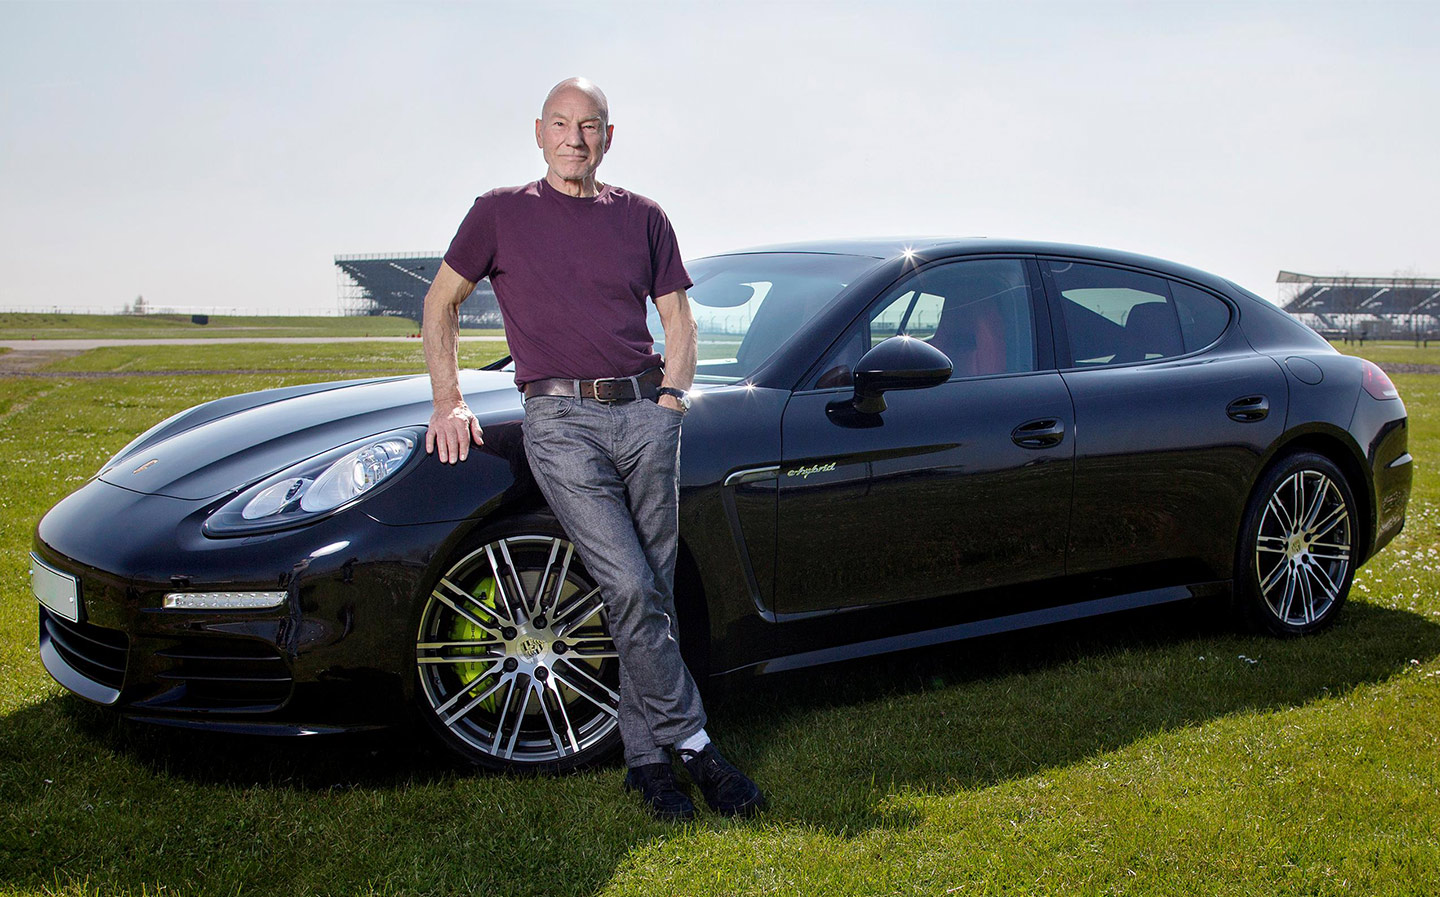 Me and My Motor: actor Patrick Stewart